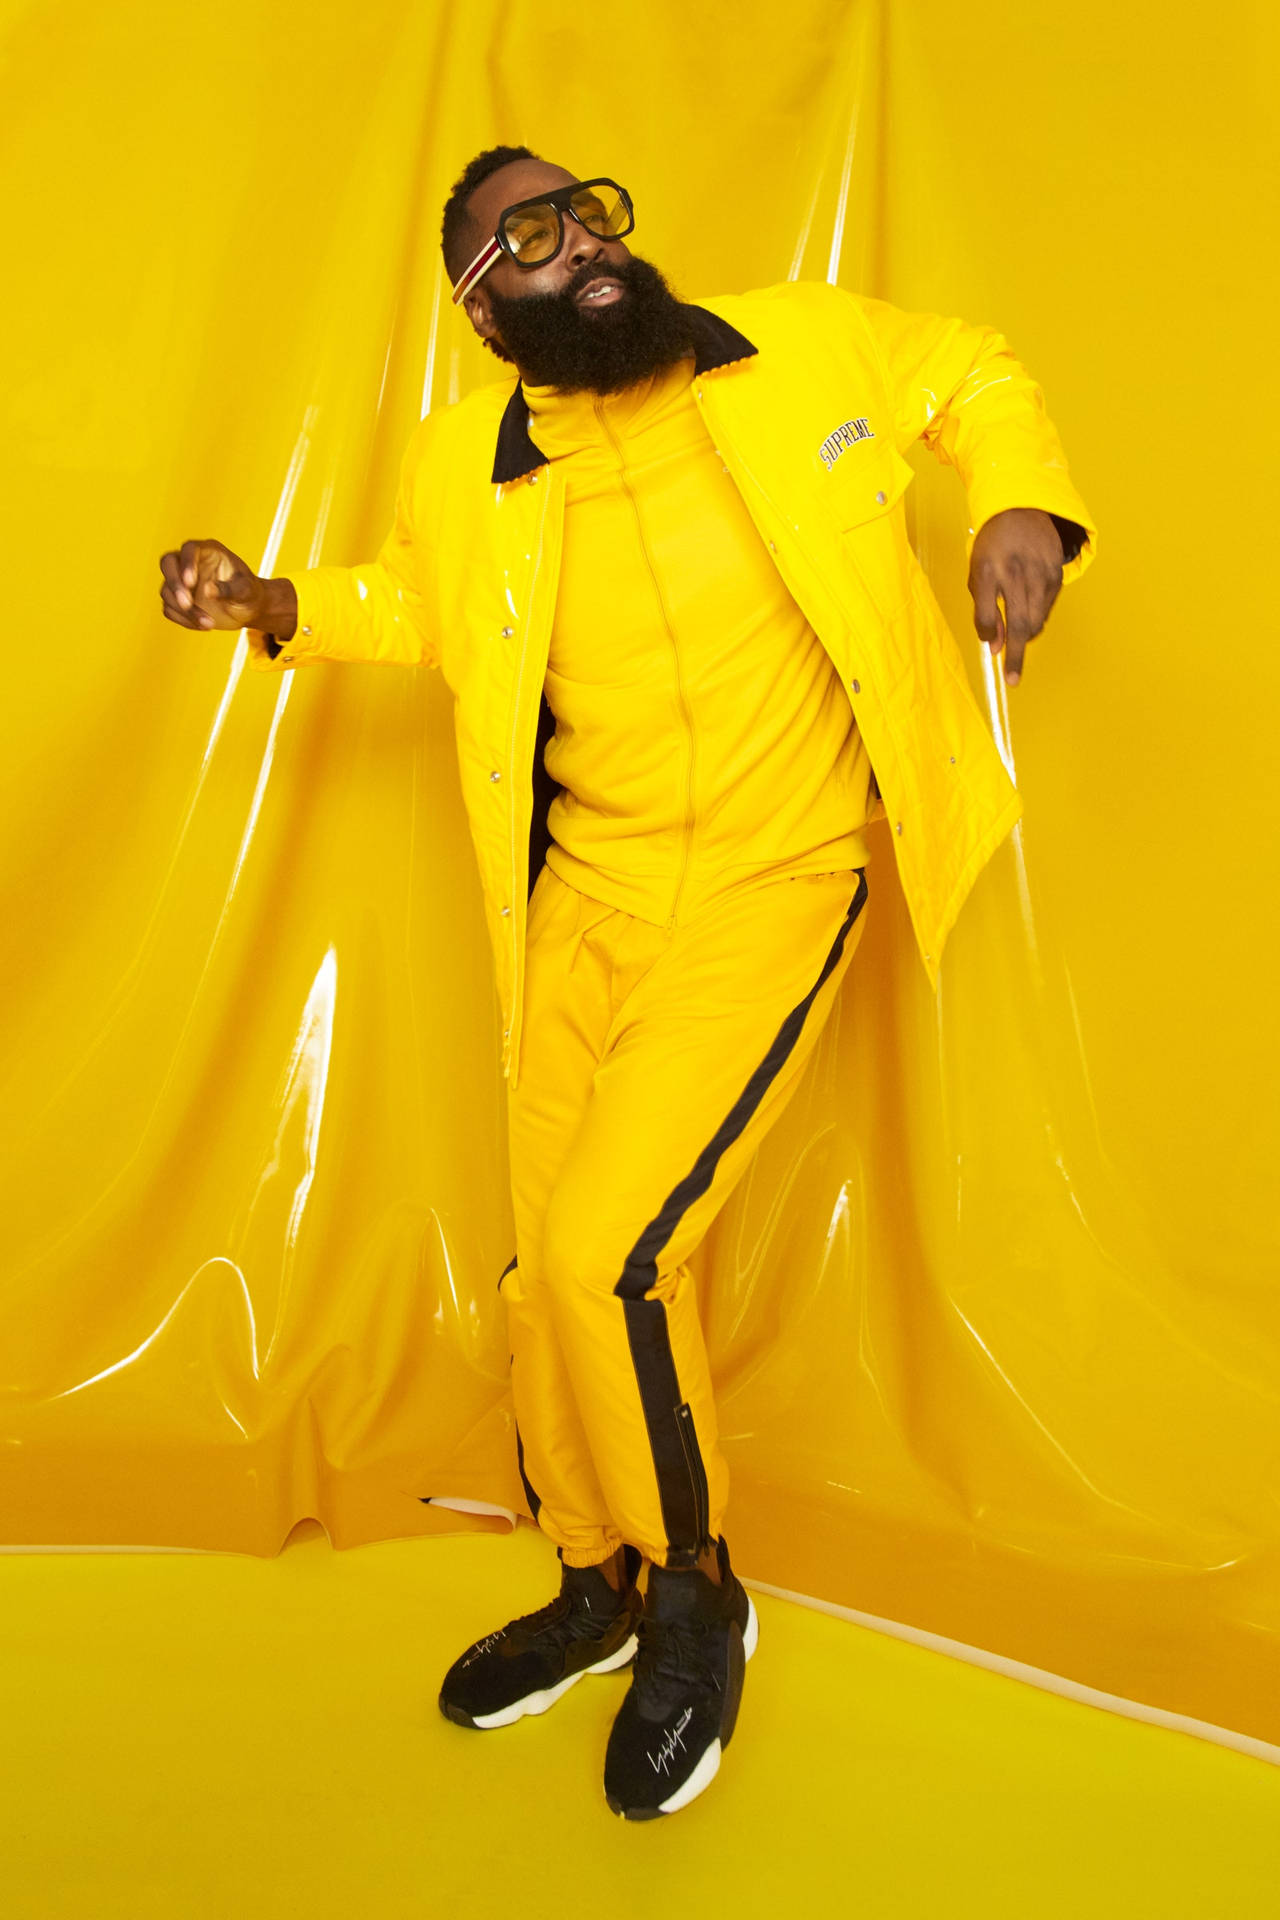 James Harden Dancing In Yellow Outfit Background